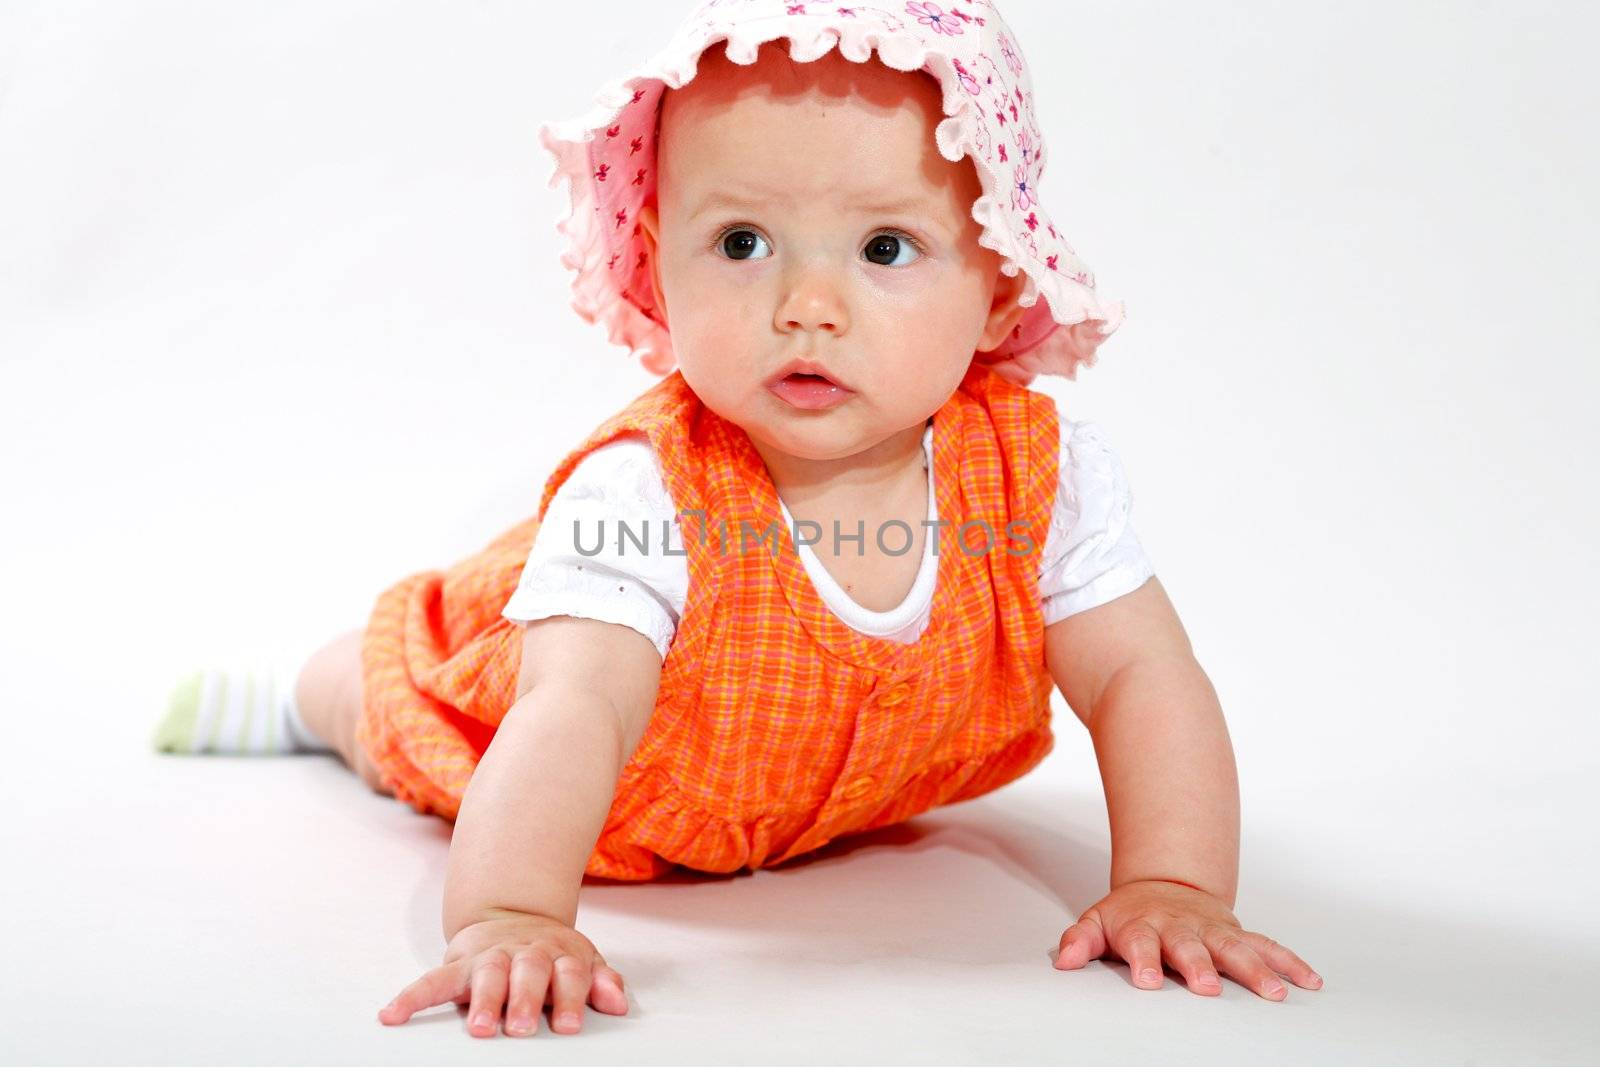 A little baby-girl crawling on the floor